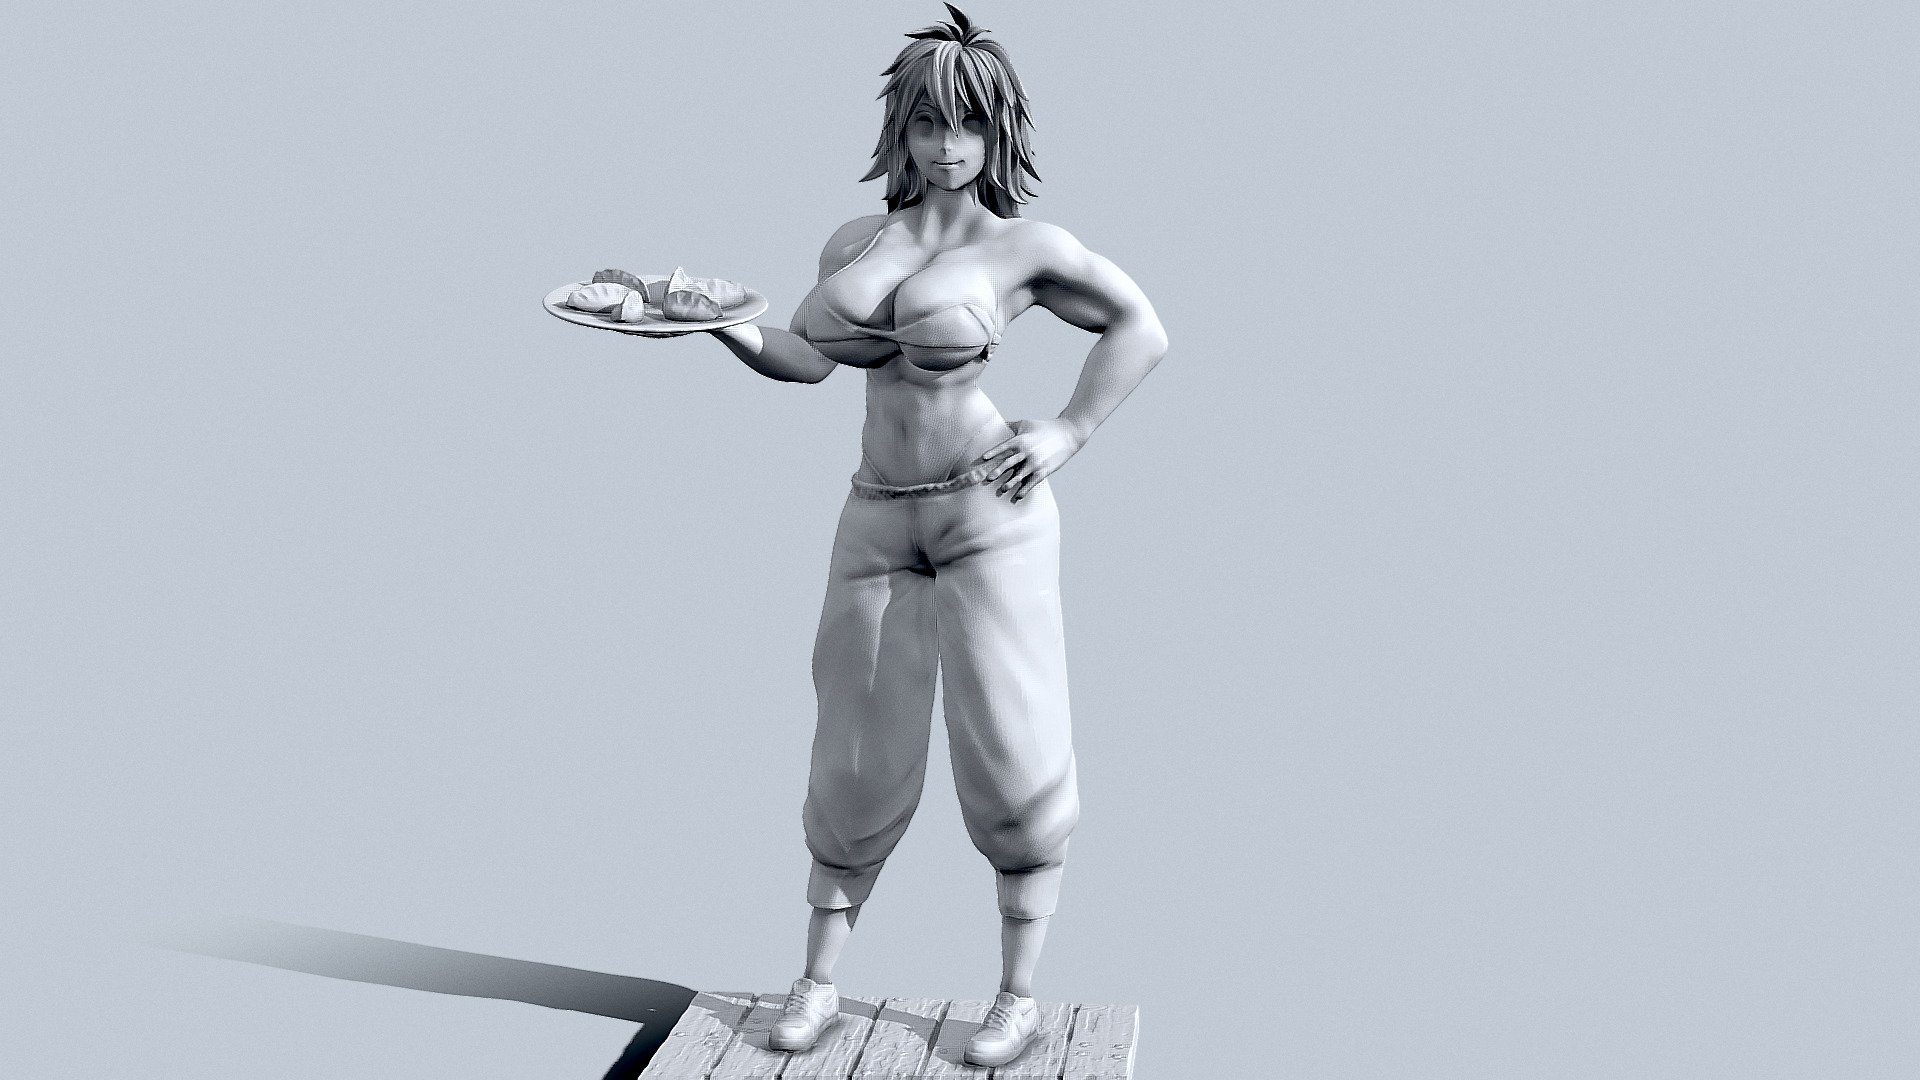 🥟💦Nikaido from Dorohedoro with gyoza plate sculpt  💦🥟( ꈍ◡ꈍ)♡ __  ( 🥟 ) ( 🥟 )

Cant say if this is 3d printable sins I dont have a 3d printer, but I think you can modify it to be printable.

𝙮𝙤𝙪 𝙘𝙖𝙣 𝙨𝙪𝙥𝙥𝙤𝙧𝙩 𝙢𝙚 𝙤𝙣 𝙠𝙤-𝙛𝙞 (╯⋋□⋌)╯=͟͟͞͞ ♥♥♥♥ ko-fi.com/sffffffff - 🥟Nikaido from Dorohedoro🥟 - Download Free 3D model by gulvtaepper 3d model